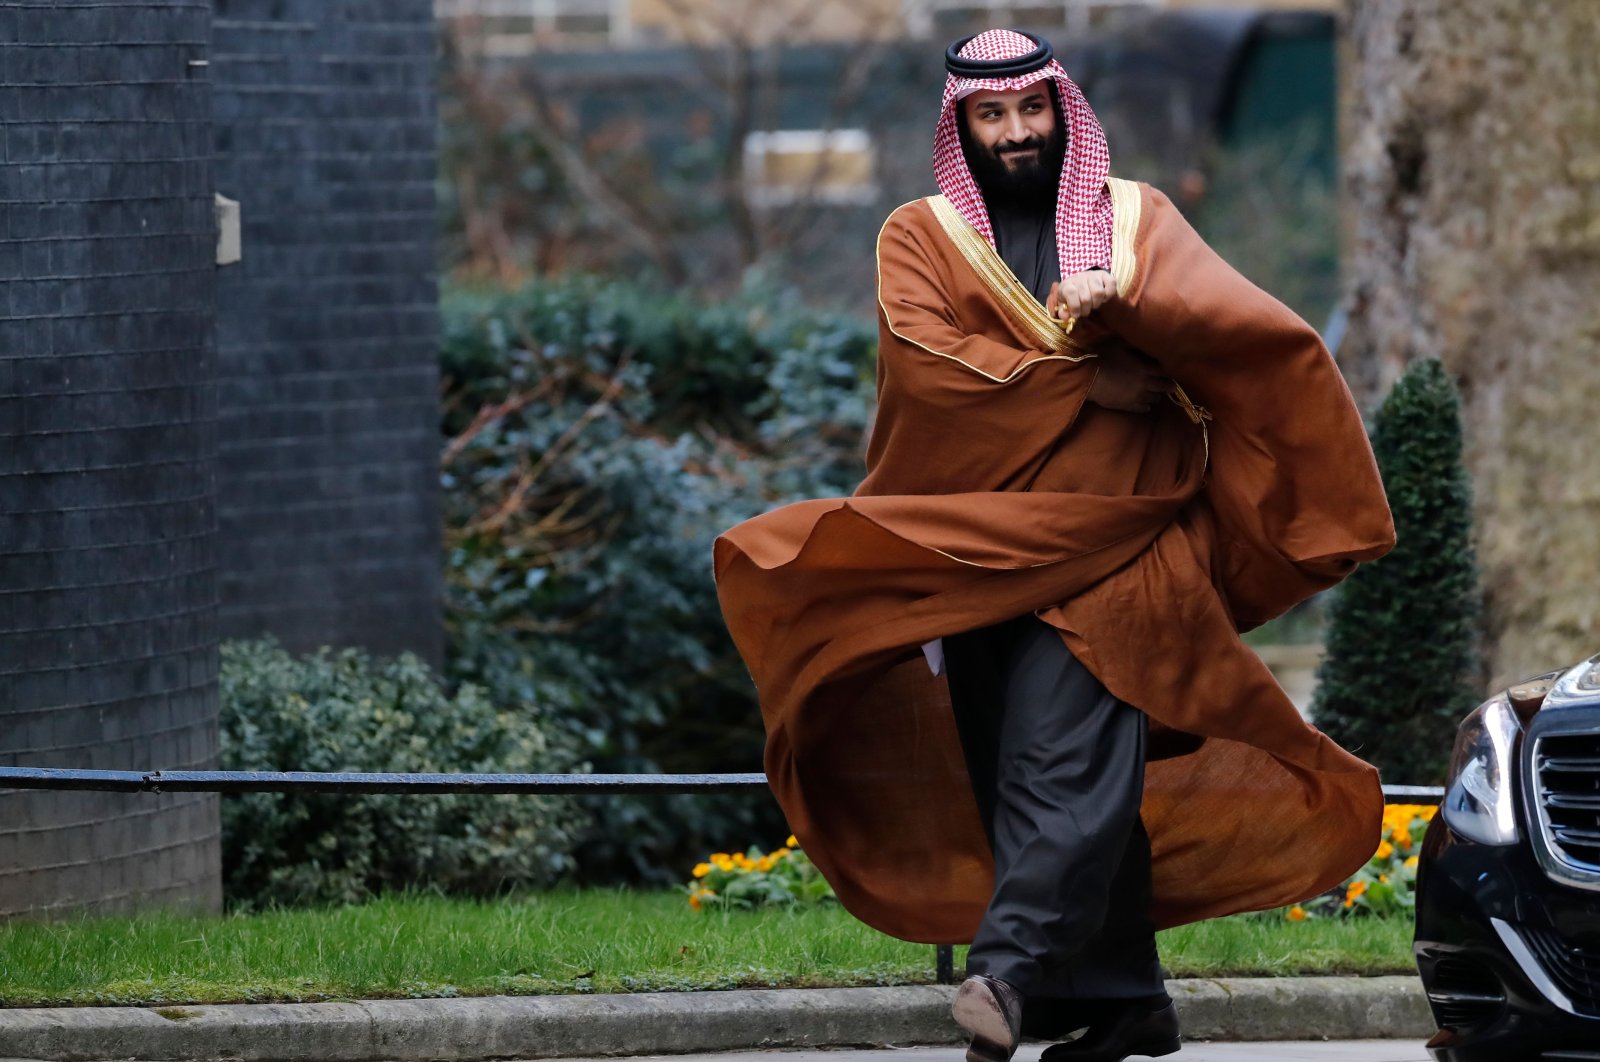 This March 07, 2018, file photo shows Saudi Arabia's Crown Prince Mohammed bin Salman arriving for talks at the British Prime Minister's office at 10 Downing Street, in London. (AFP Photo)